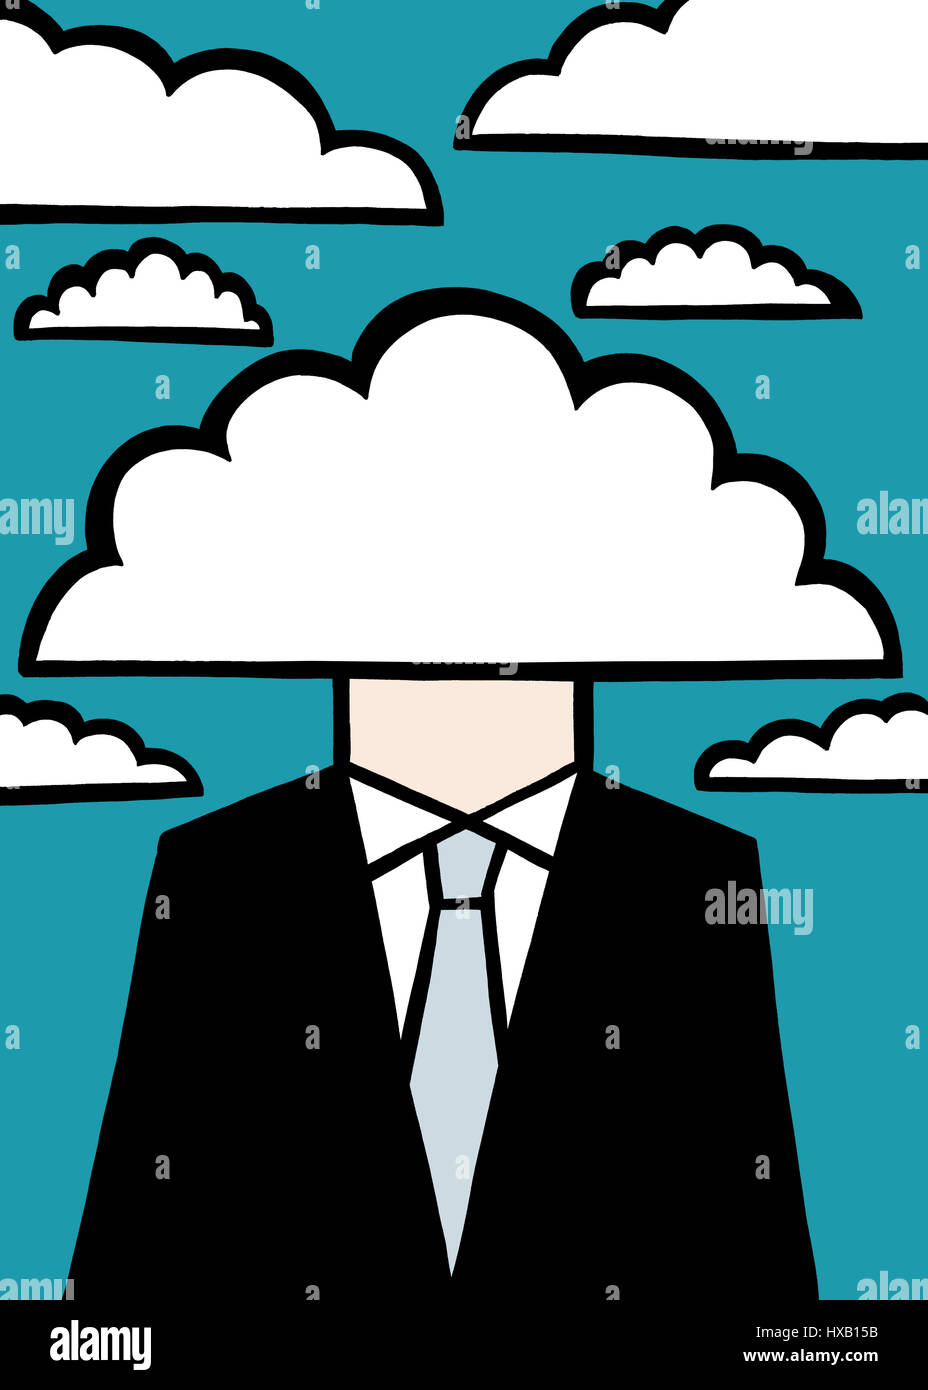 Think cloud. Be cloud. Stock Photo